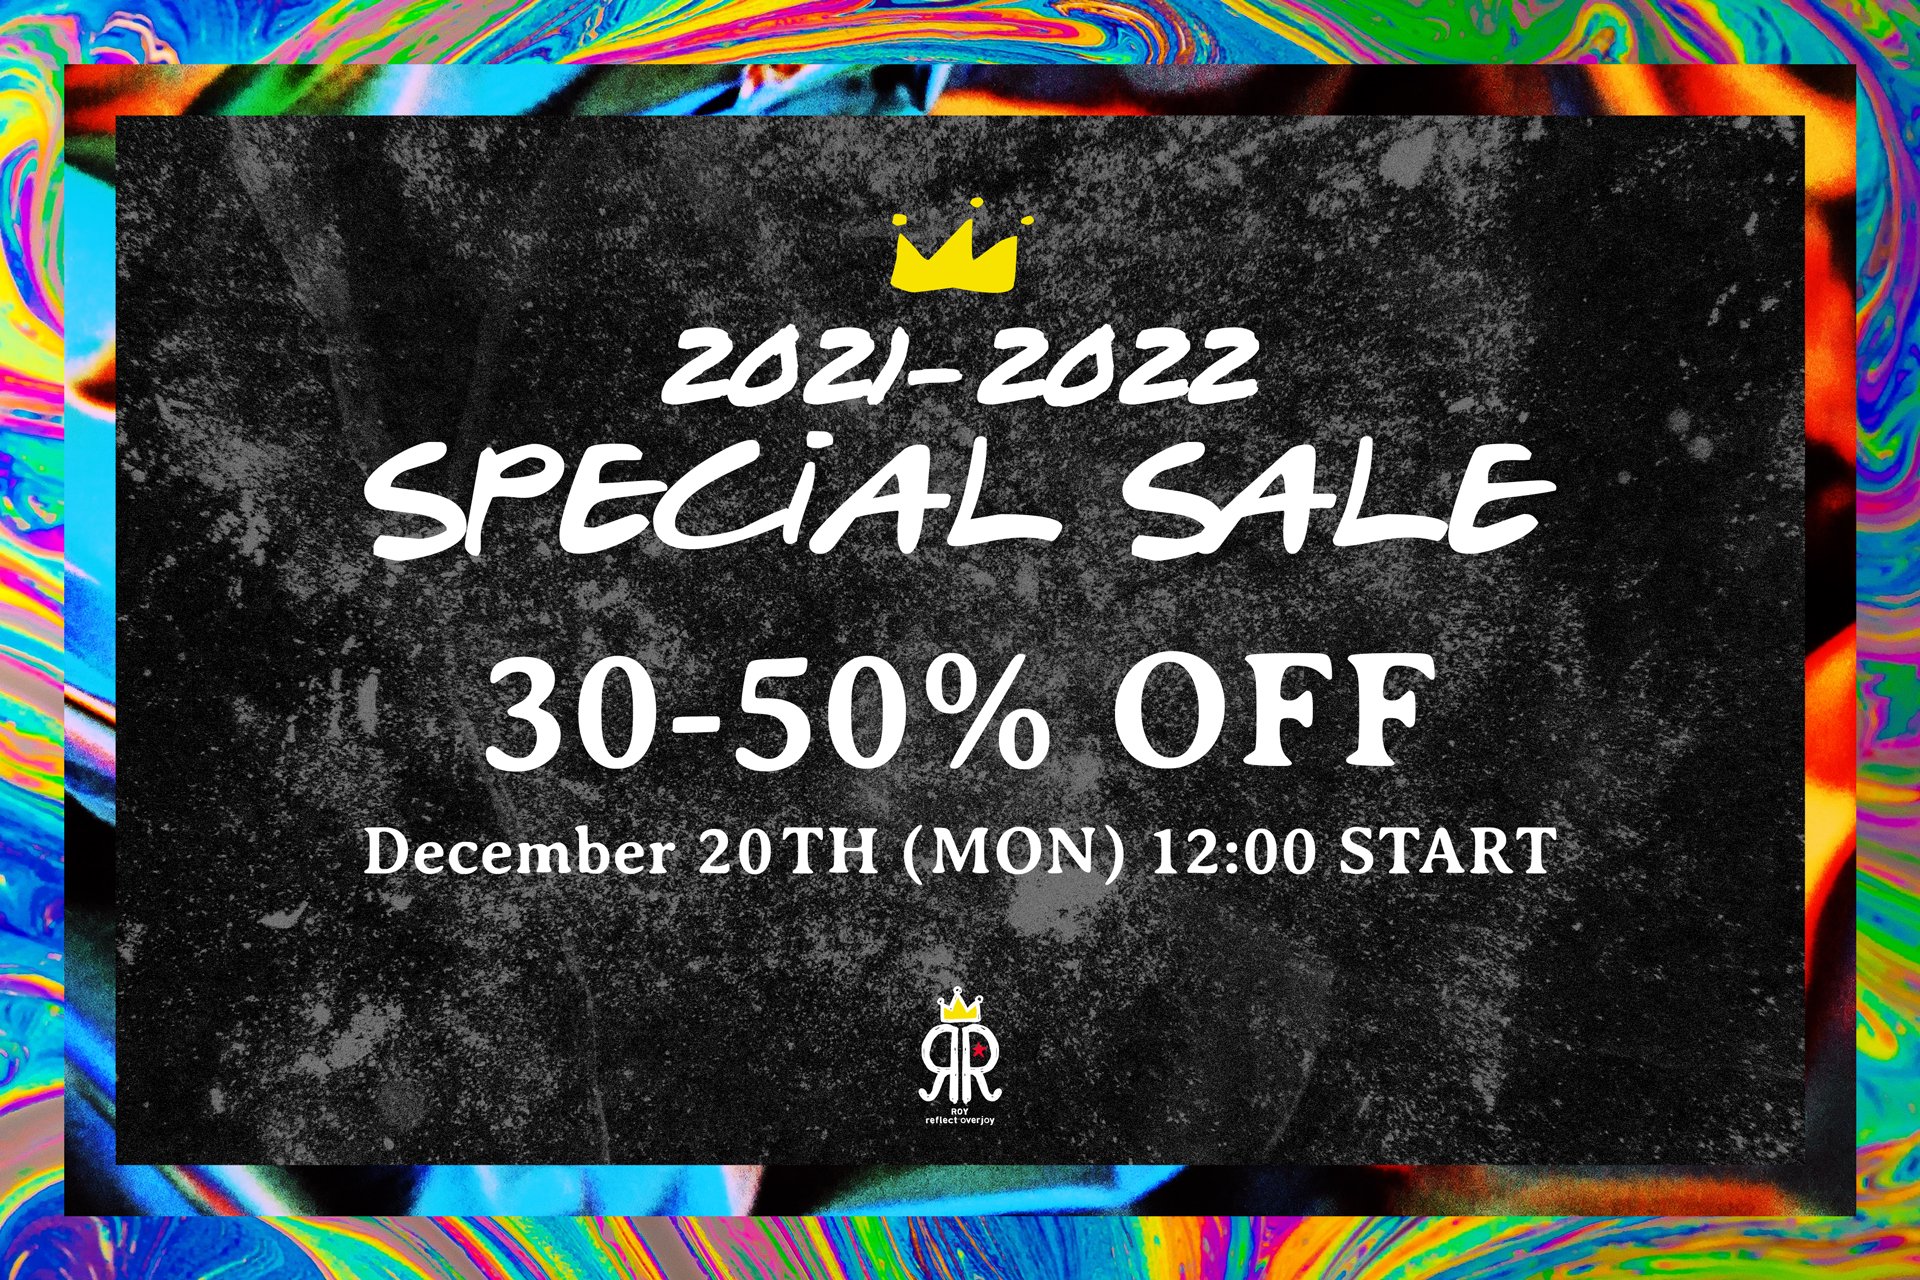 SPECiAL SALE